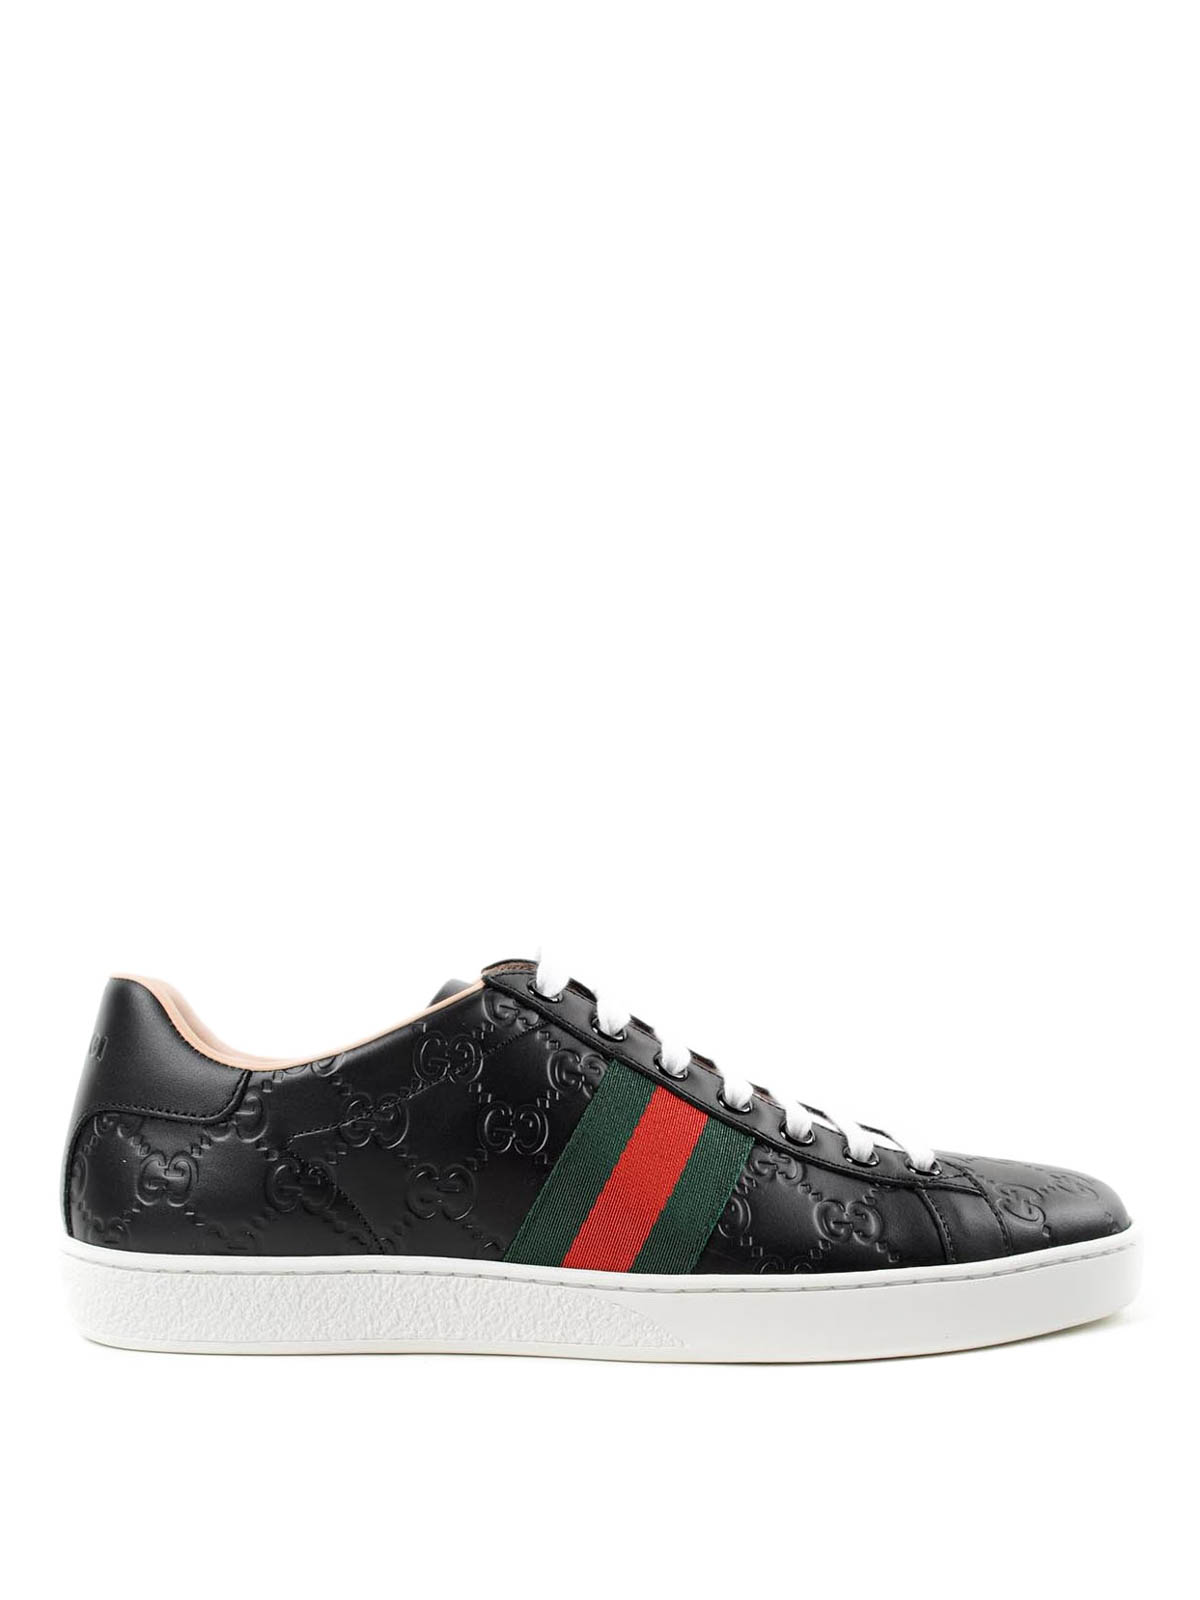 Trainers Gucci - GG leather sneakers - 387993CWCG01070 | iKRIX.com